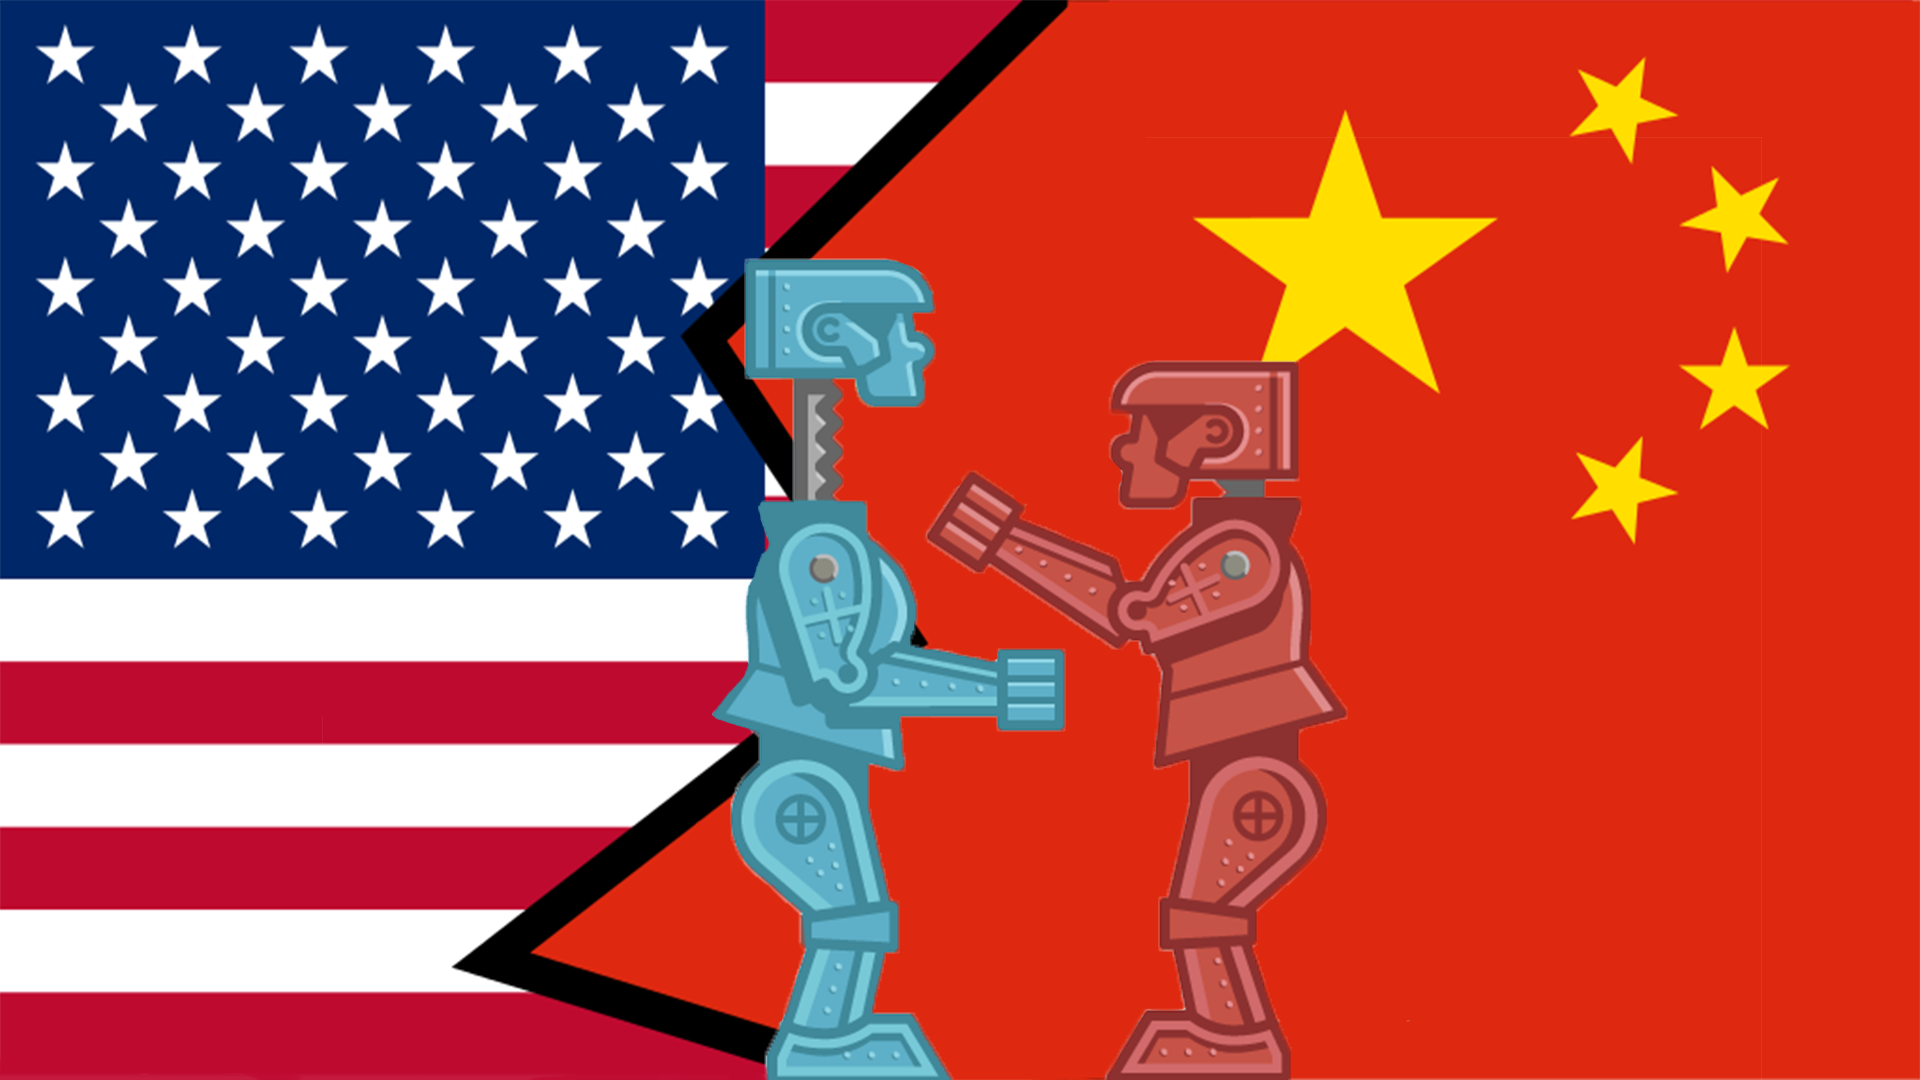 China Fights to Beat U.S. in AI within 5 Years – Seeflection.com